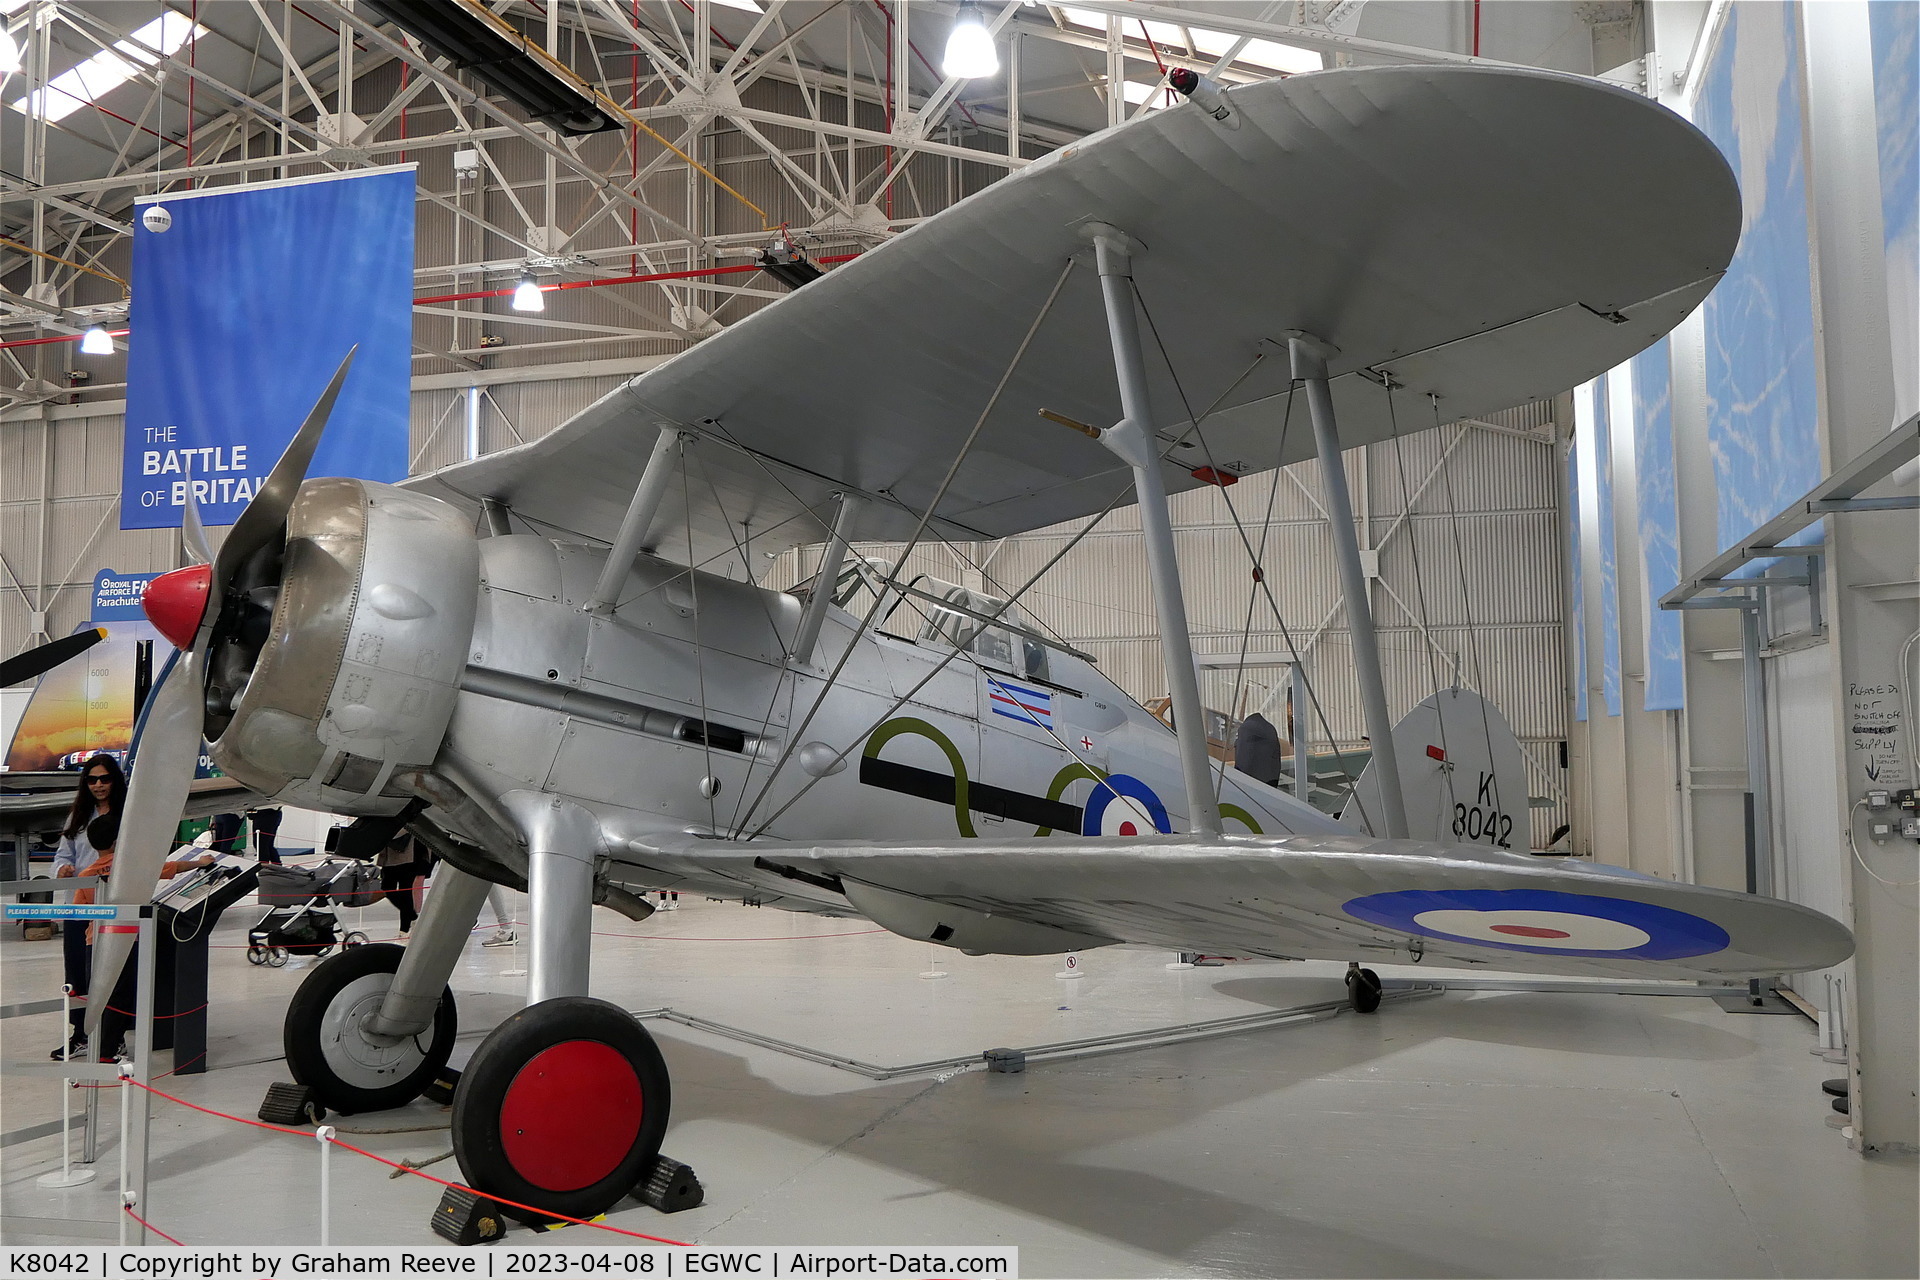 K8042, Gloster Gladiator Mk1 C/N Not found K8042, On display at the RAF Museum, Cosford.